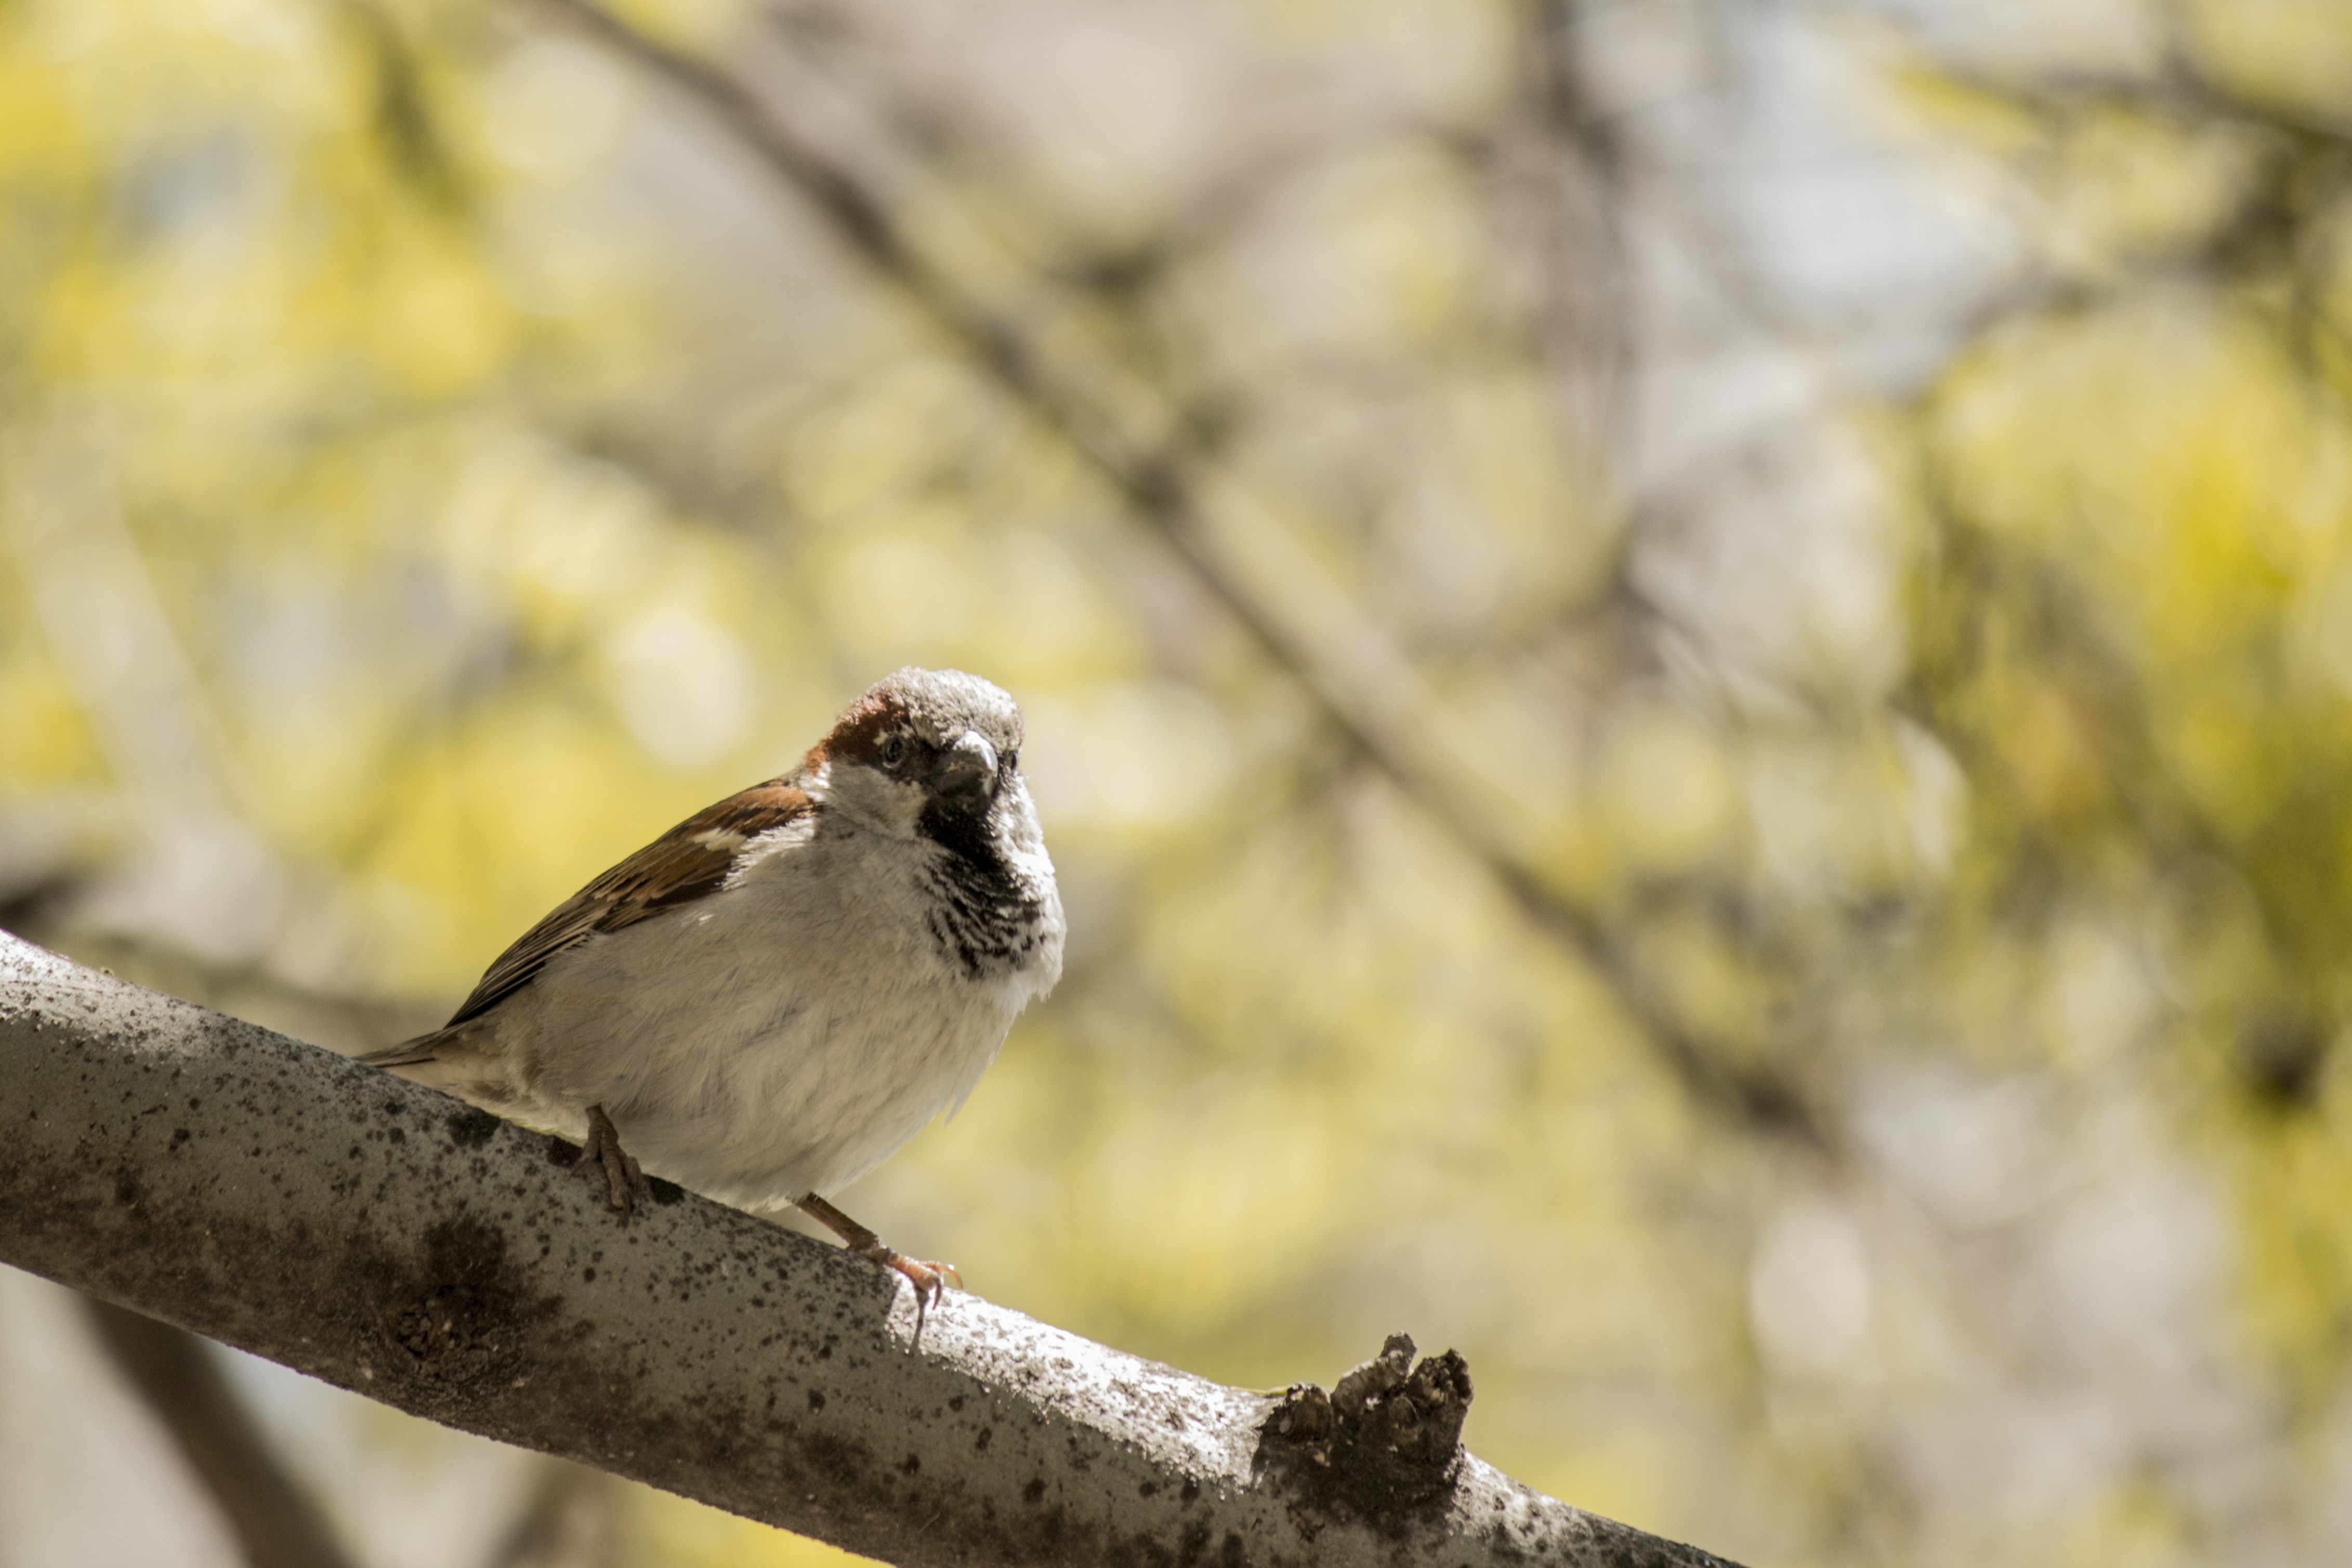 brown and white sparrow on tree branch during daytime